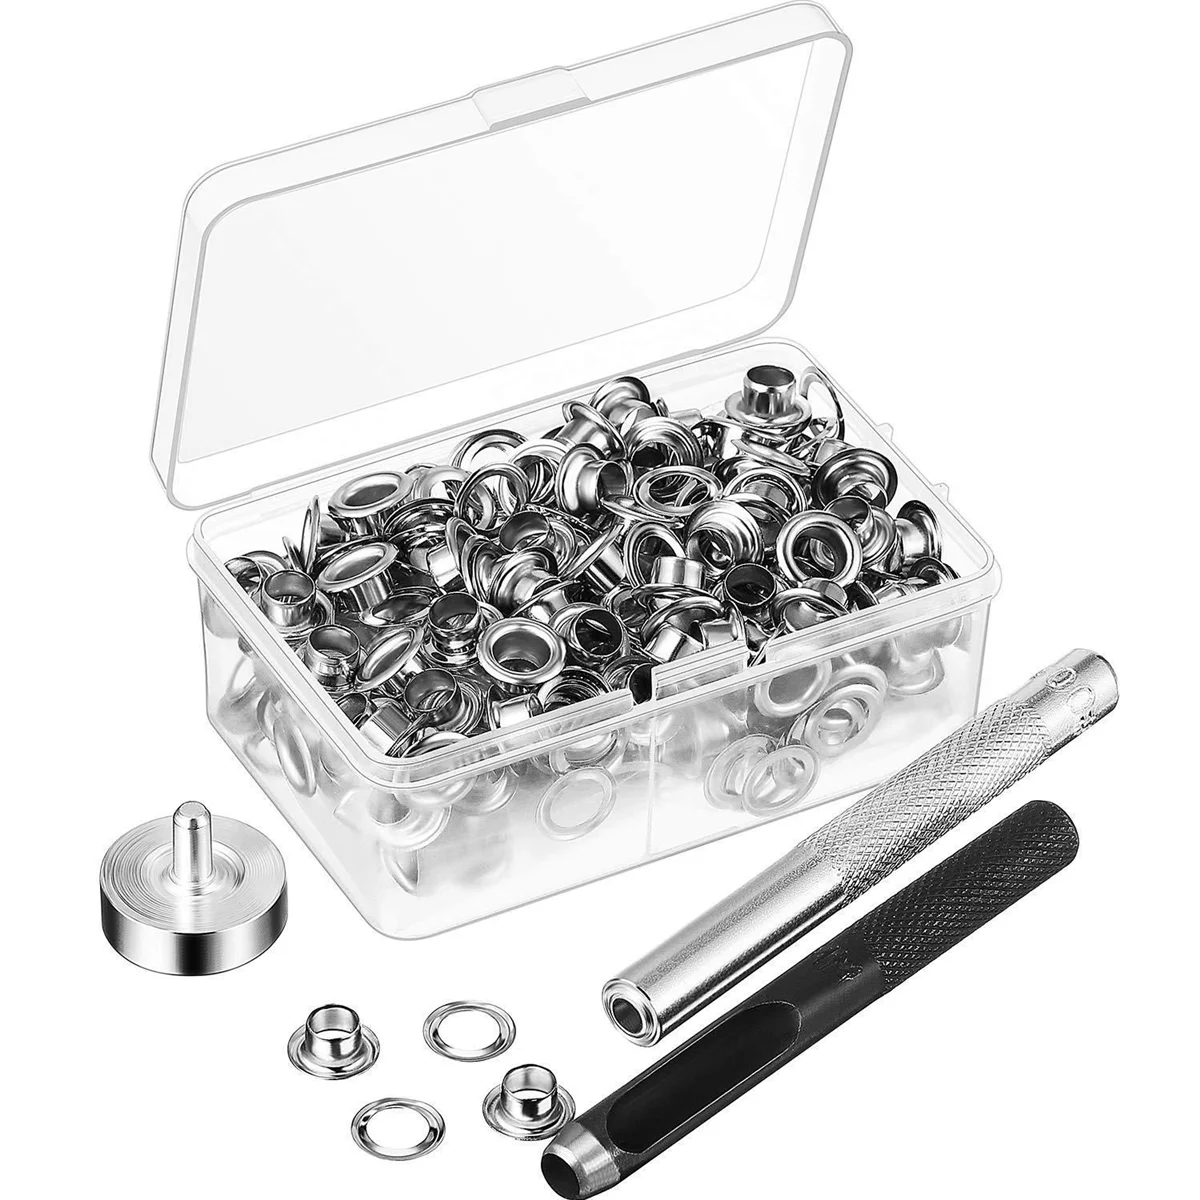 

100Pcs Metal Eyelets Set 6mm Grommet Rings Kit with Mounting Punch Rod for DIY Accessories Leather Craft Clothing Repair